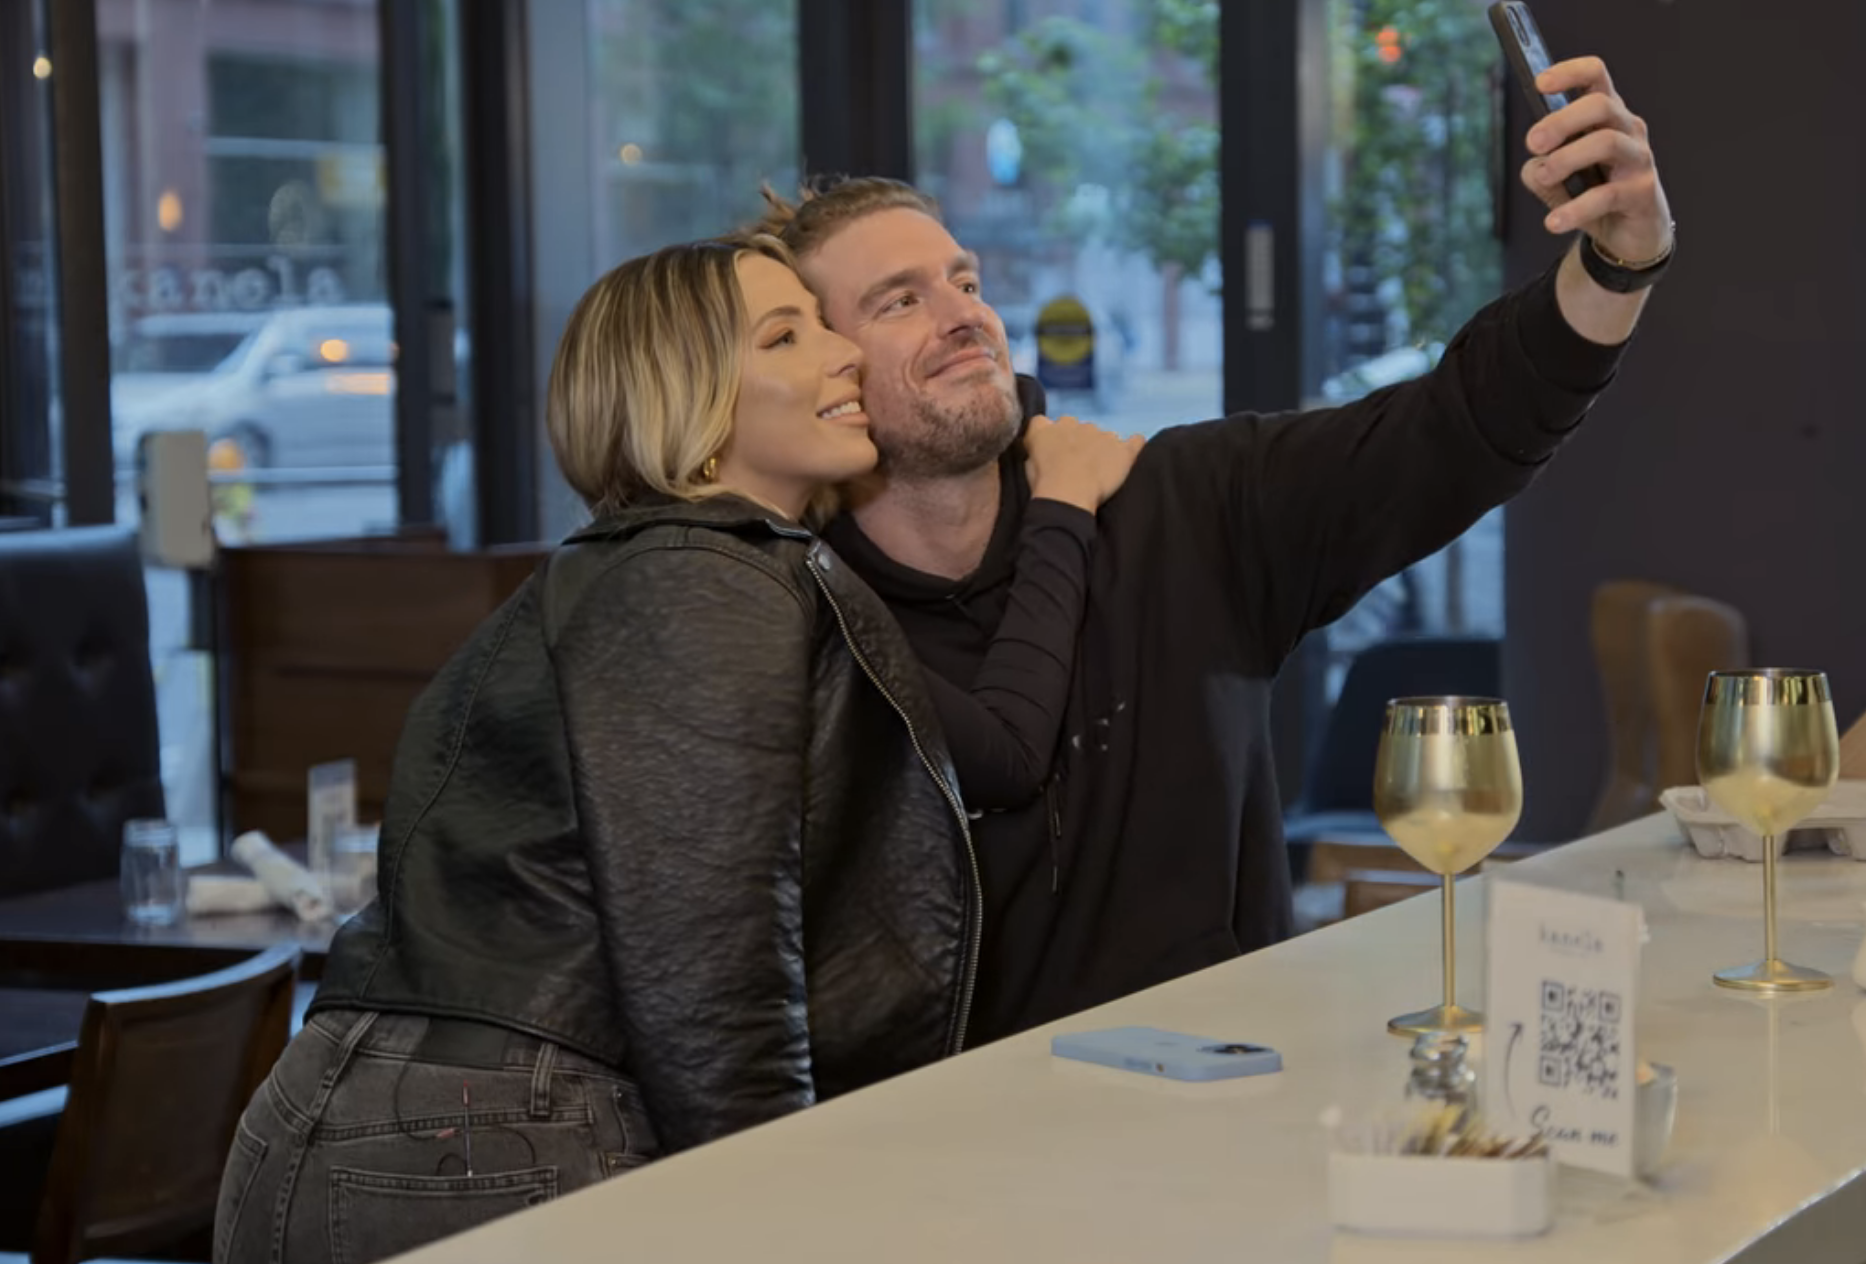 Shayne taking a selfie in a restaurant with a woman